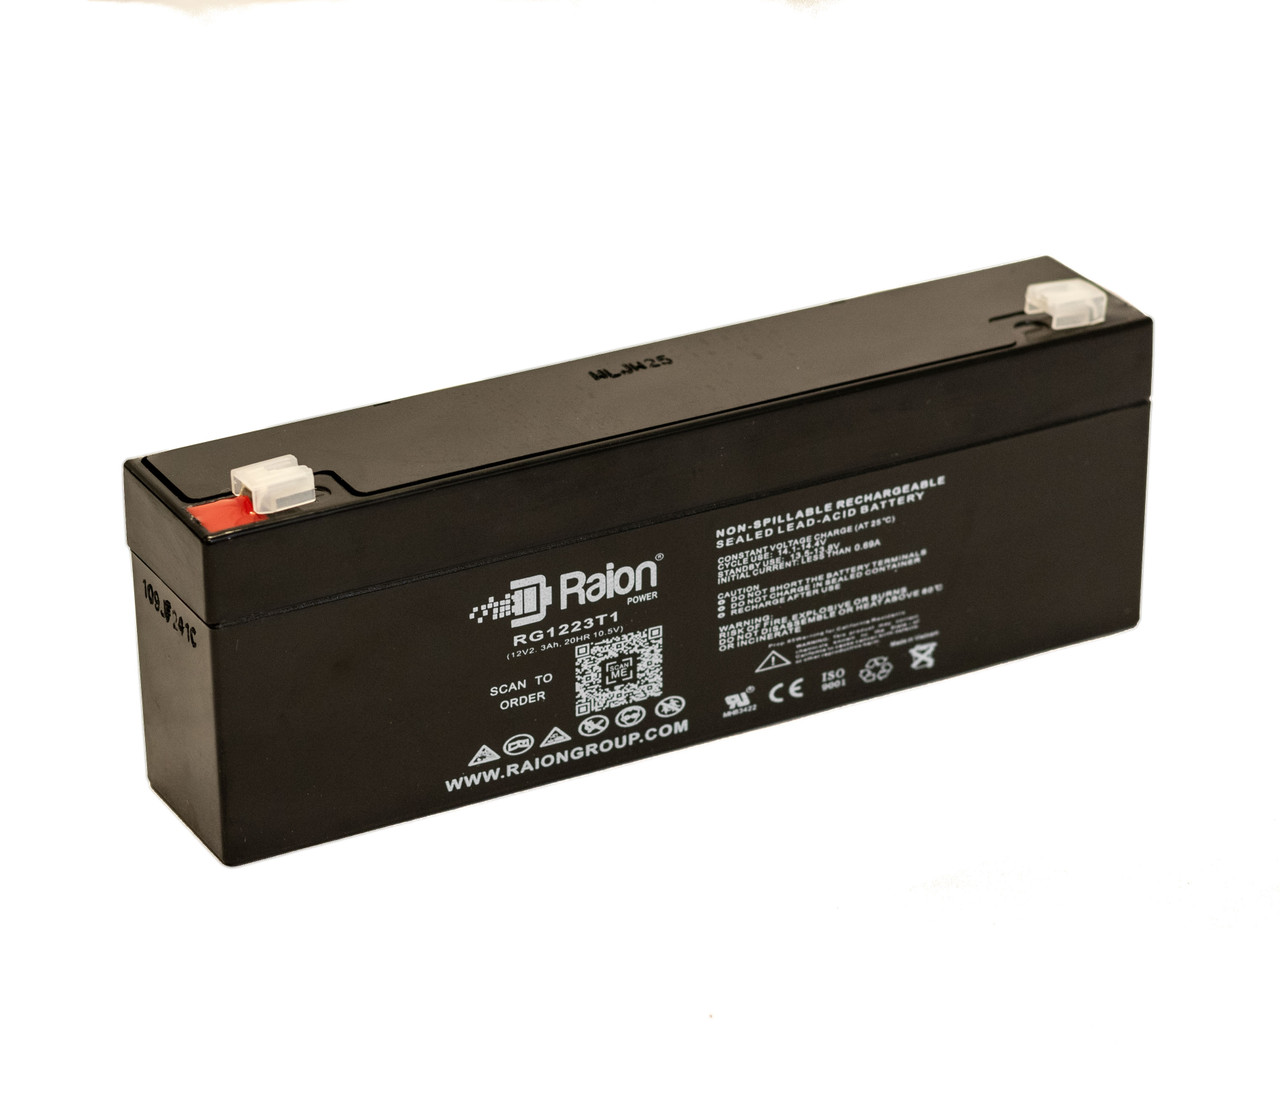 Raion Power RG1223T1 Replacement Battery for LONG WP1.9-12